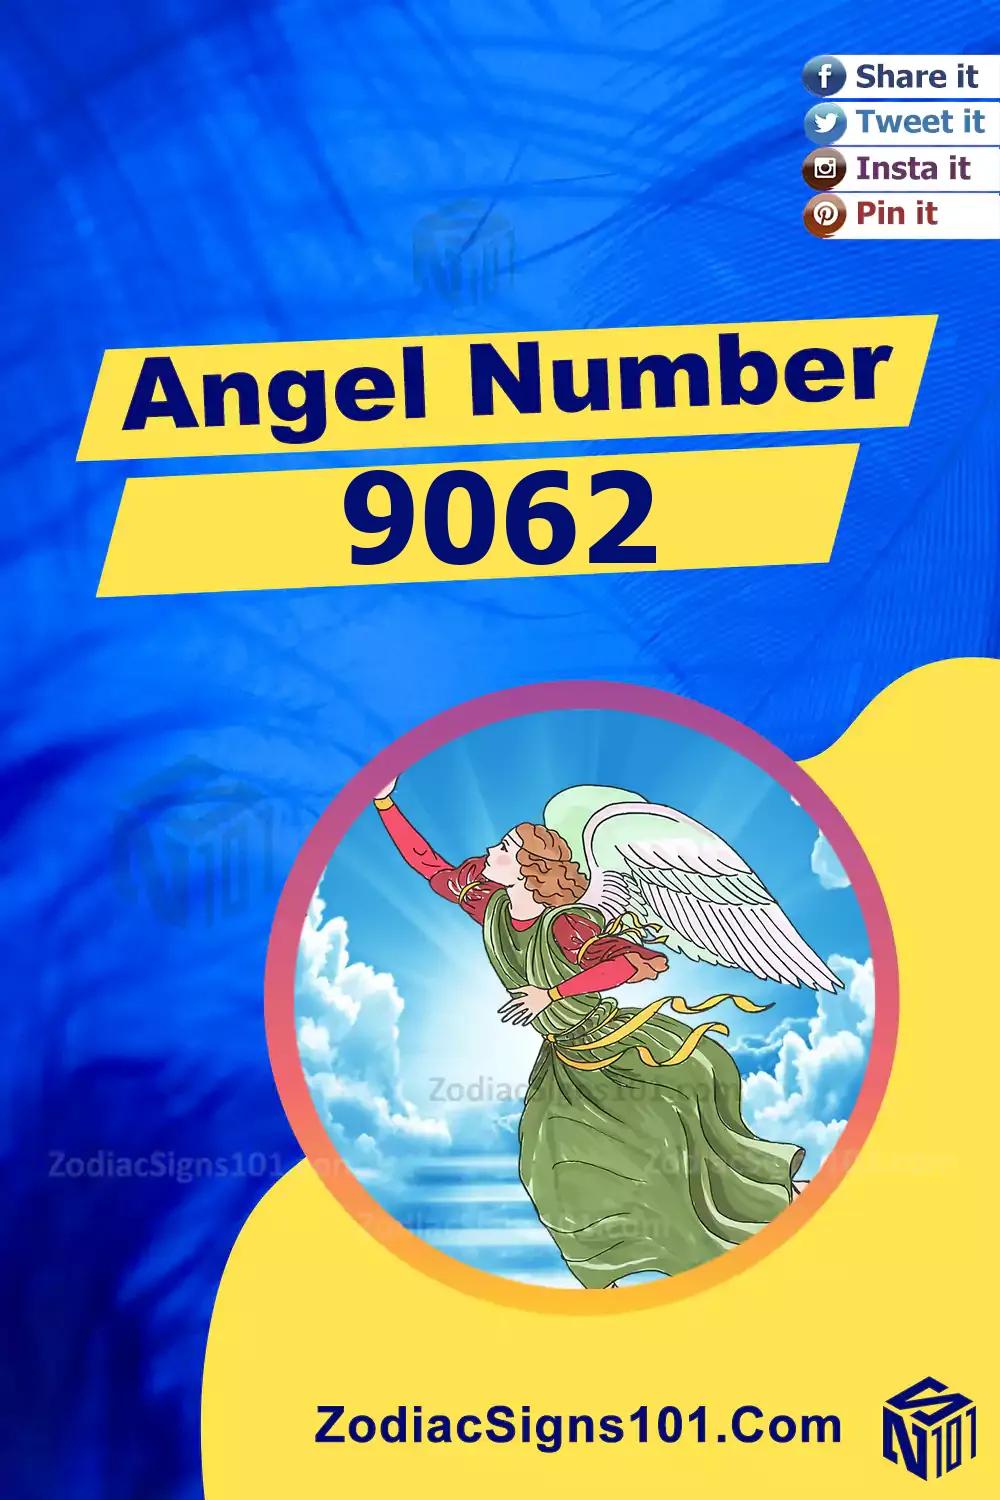 9062 Angel Number Meaning